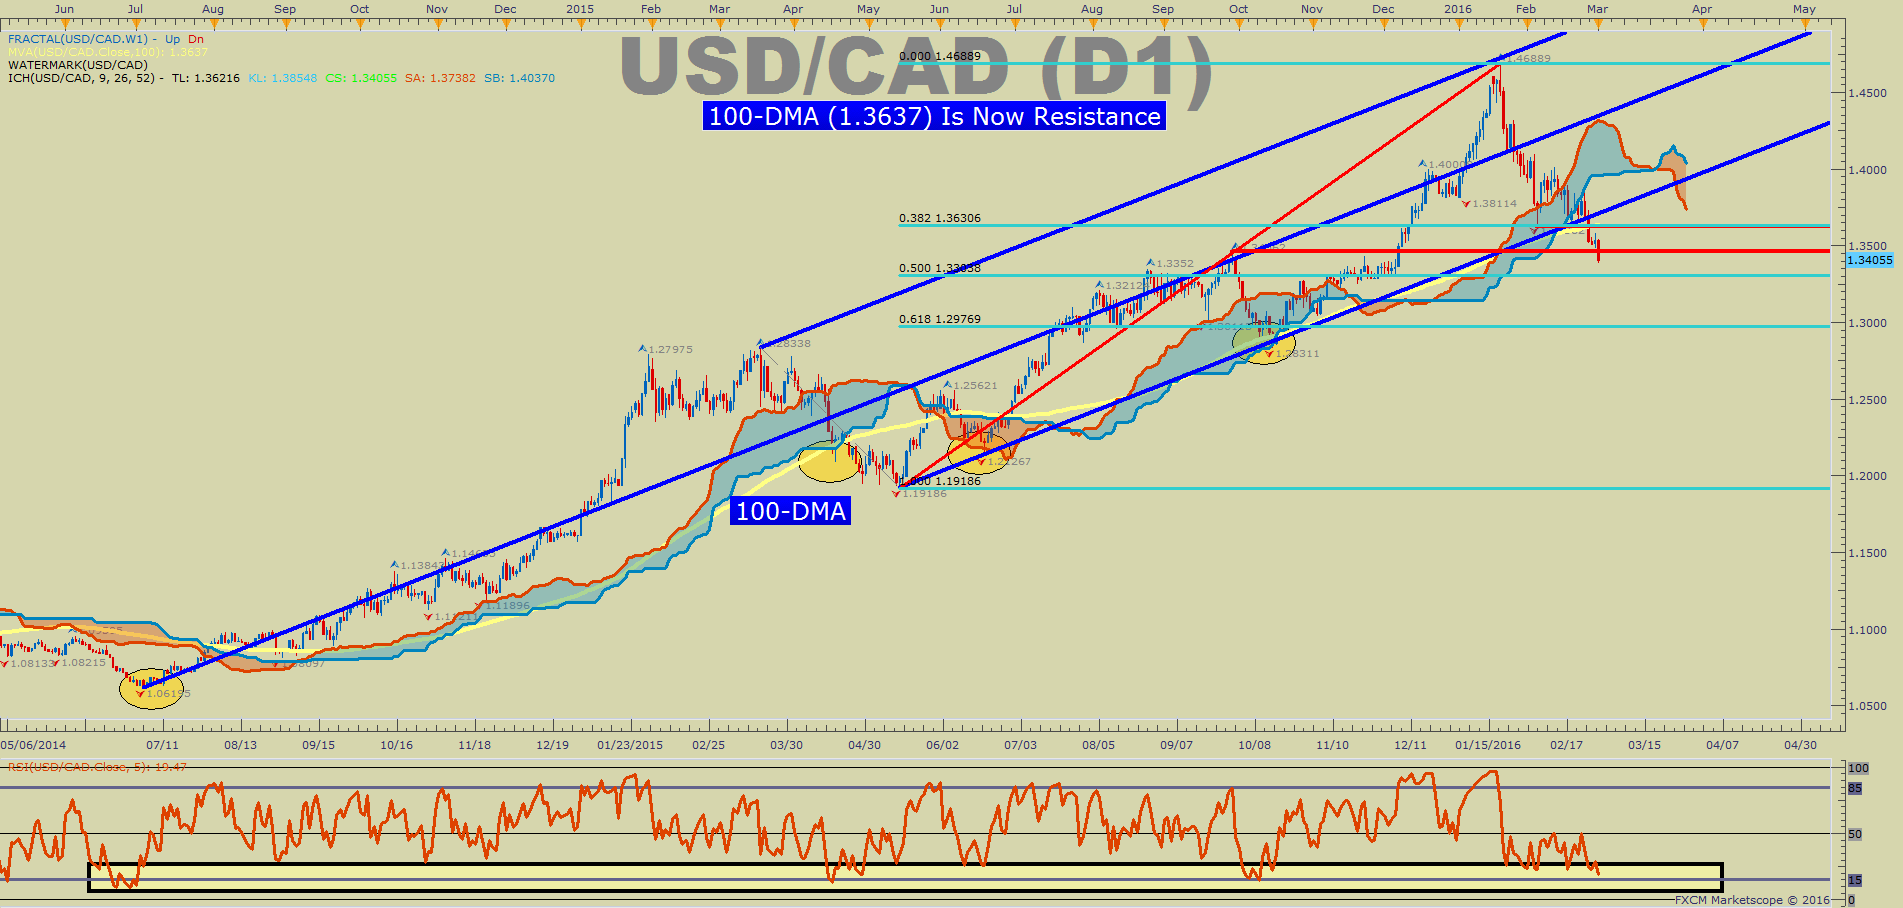 USD/CAD likely to revisit the 50-DMA near 1.3420/1.3385 – SocGen